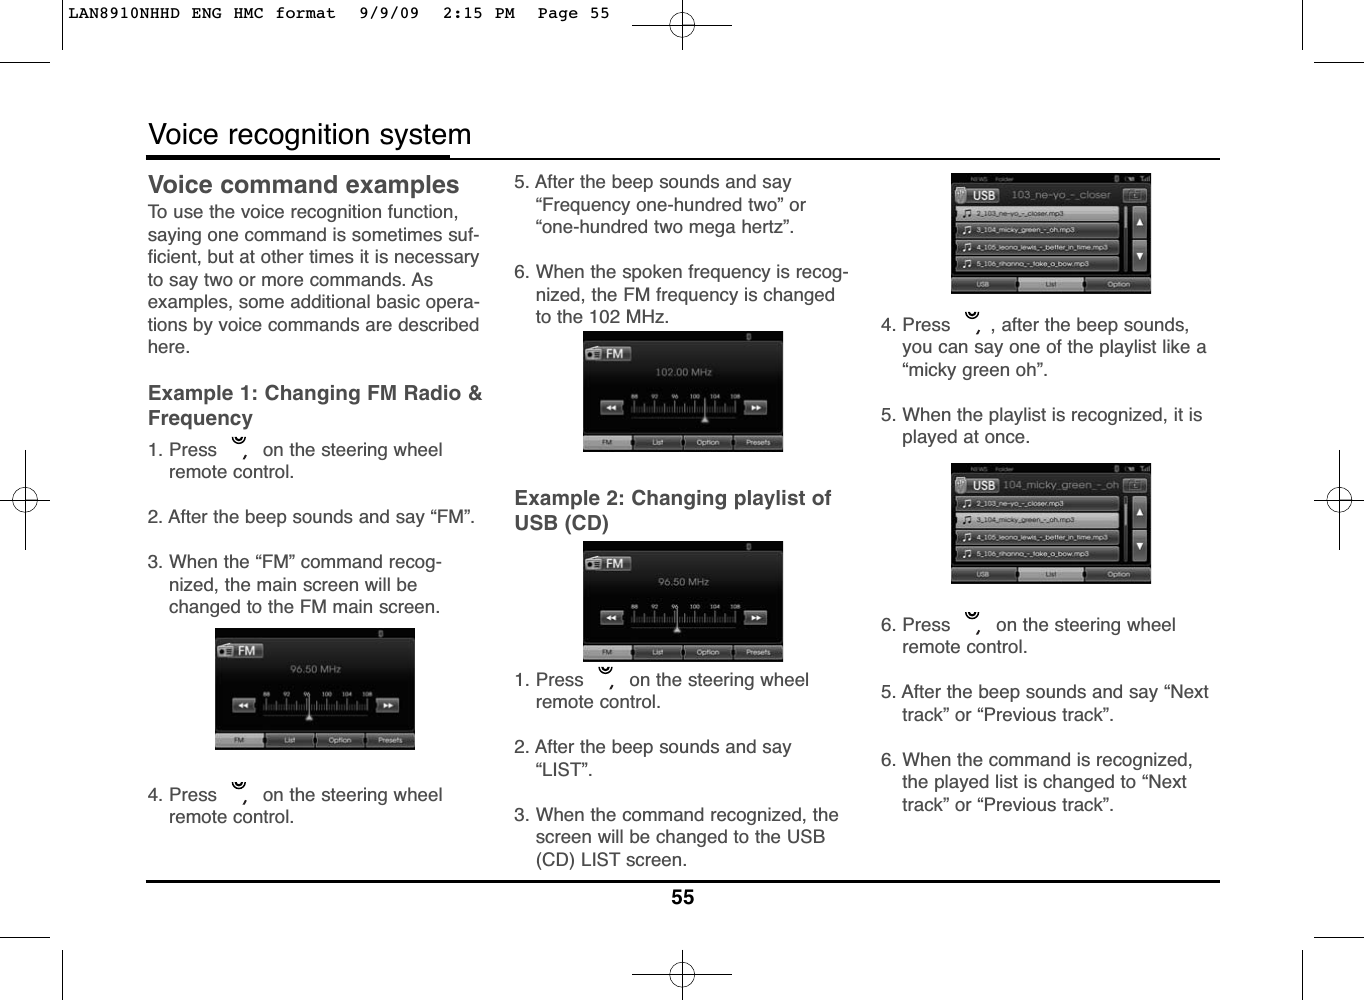 Voice command examplesTo use the voice recognition function,saying one command is sometimes suf-ficient, but at other times it is necessaryto say two or more commands. Asexamples, some additional basic opera-tions by voice commands are describedhere.Example 1: Changing FM Radio &amp;Frequency1. Press  on the steering wheelremote control.2. After the beep sounds and say “FM”.3. When the “FM” command recog-nized, the main screen will bechanged to the FM main screen.4. Press  on the steering wheelremote control.5. After the beep sounds and say“Frequency one-hundred two” or“one-hundred two mega hertz”.6. When the spoken frequency is recog-nized, the FM frequency is changedto the 102 MHz.Example 2: Changing playlist ofUSB (CD)1. Press  on the steering wheelremote control.2. After the beep sounds and say“LIST”.3. When the command recognized, thescreen will be changed to the USB(CD) LIST screen.4. Press  , after the beep sounds,you can say one of the playlist like a“micky green oh”.5. When the playlist is recognized, it isplayed at once.6. Press  on the steering wheelremote control.5. After the beep sounds and say “Nexttrack” or “Previous track”.6. When the command is recognized,the played list is changed to “Nexttrack” or “Previous track”.55Voice recognition systemLAN8910NHHD ENG HMC format  9/9/09  2:15 PM  Page 55